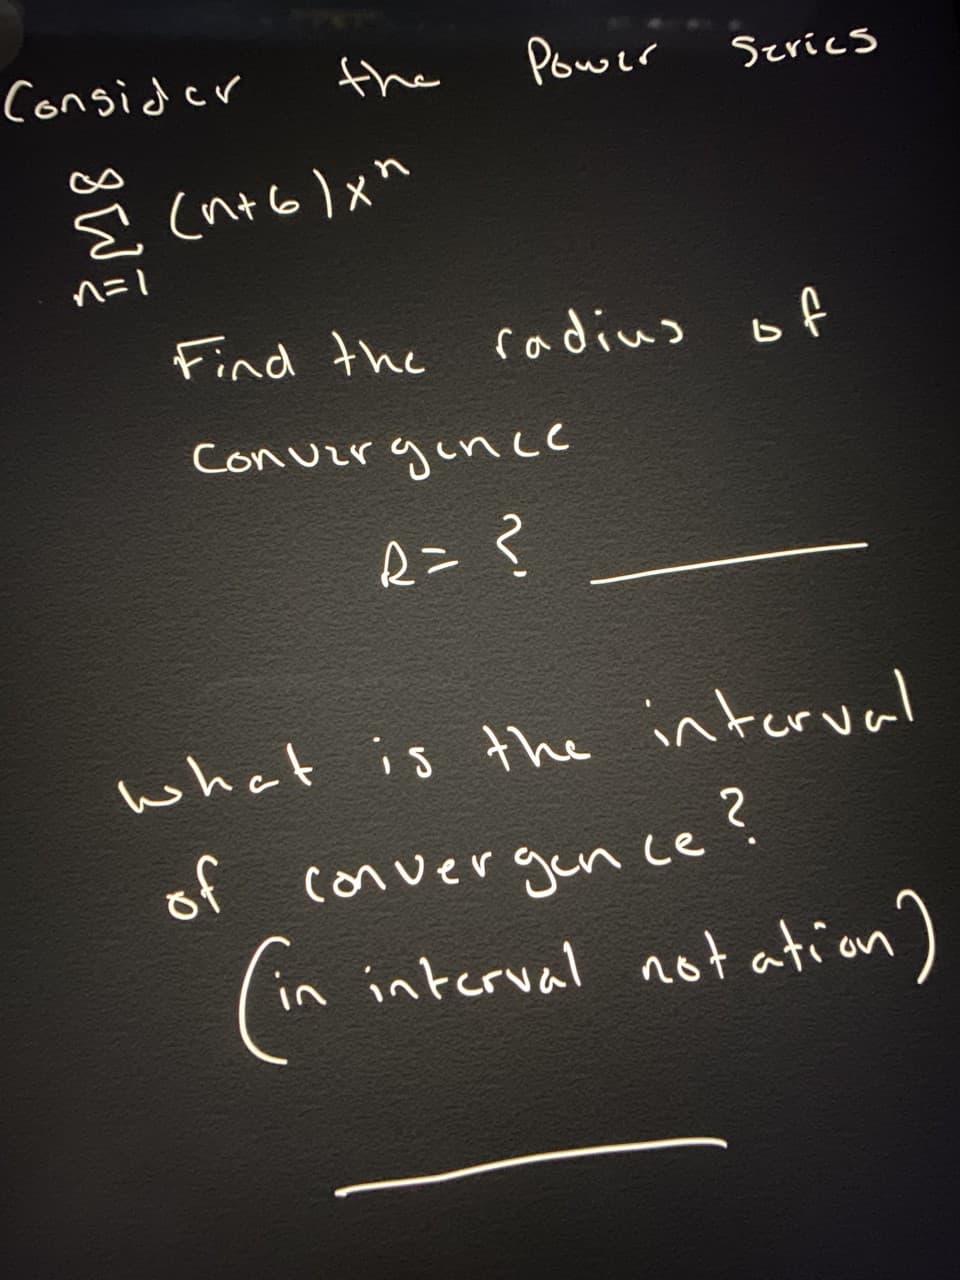 Consider
the
Power
Szrics
E (nt6)xh
Find the radius of
Conuzrgince
R= ?
what is the interval
of convergun ce s
in interval not ation')
